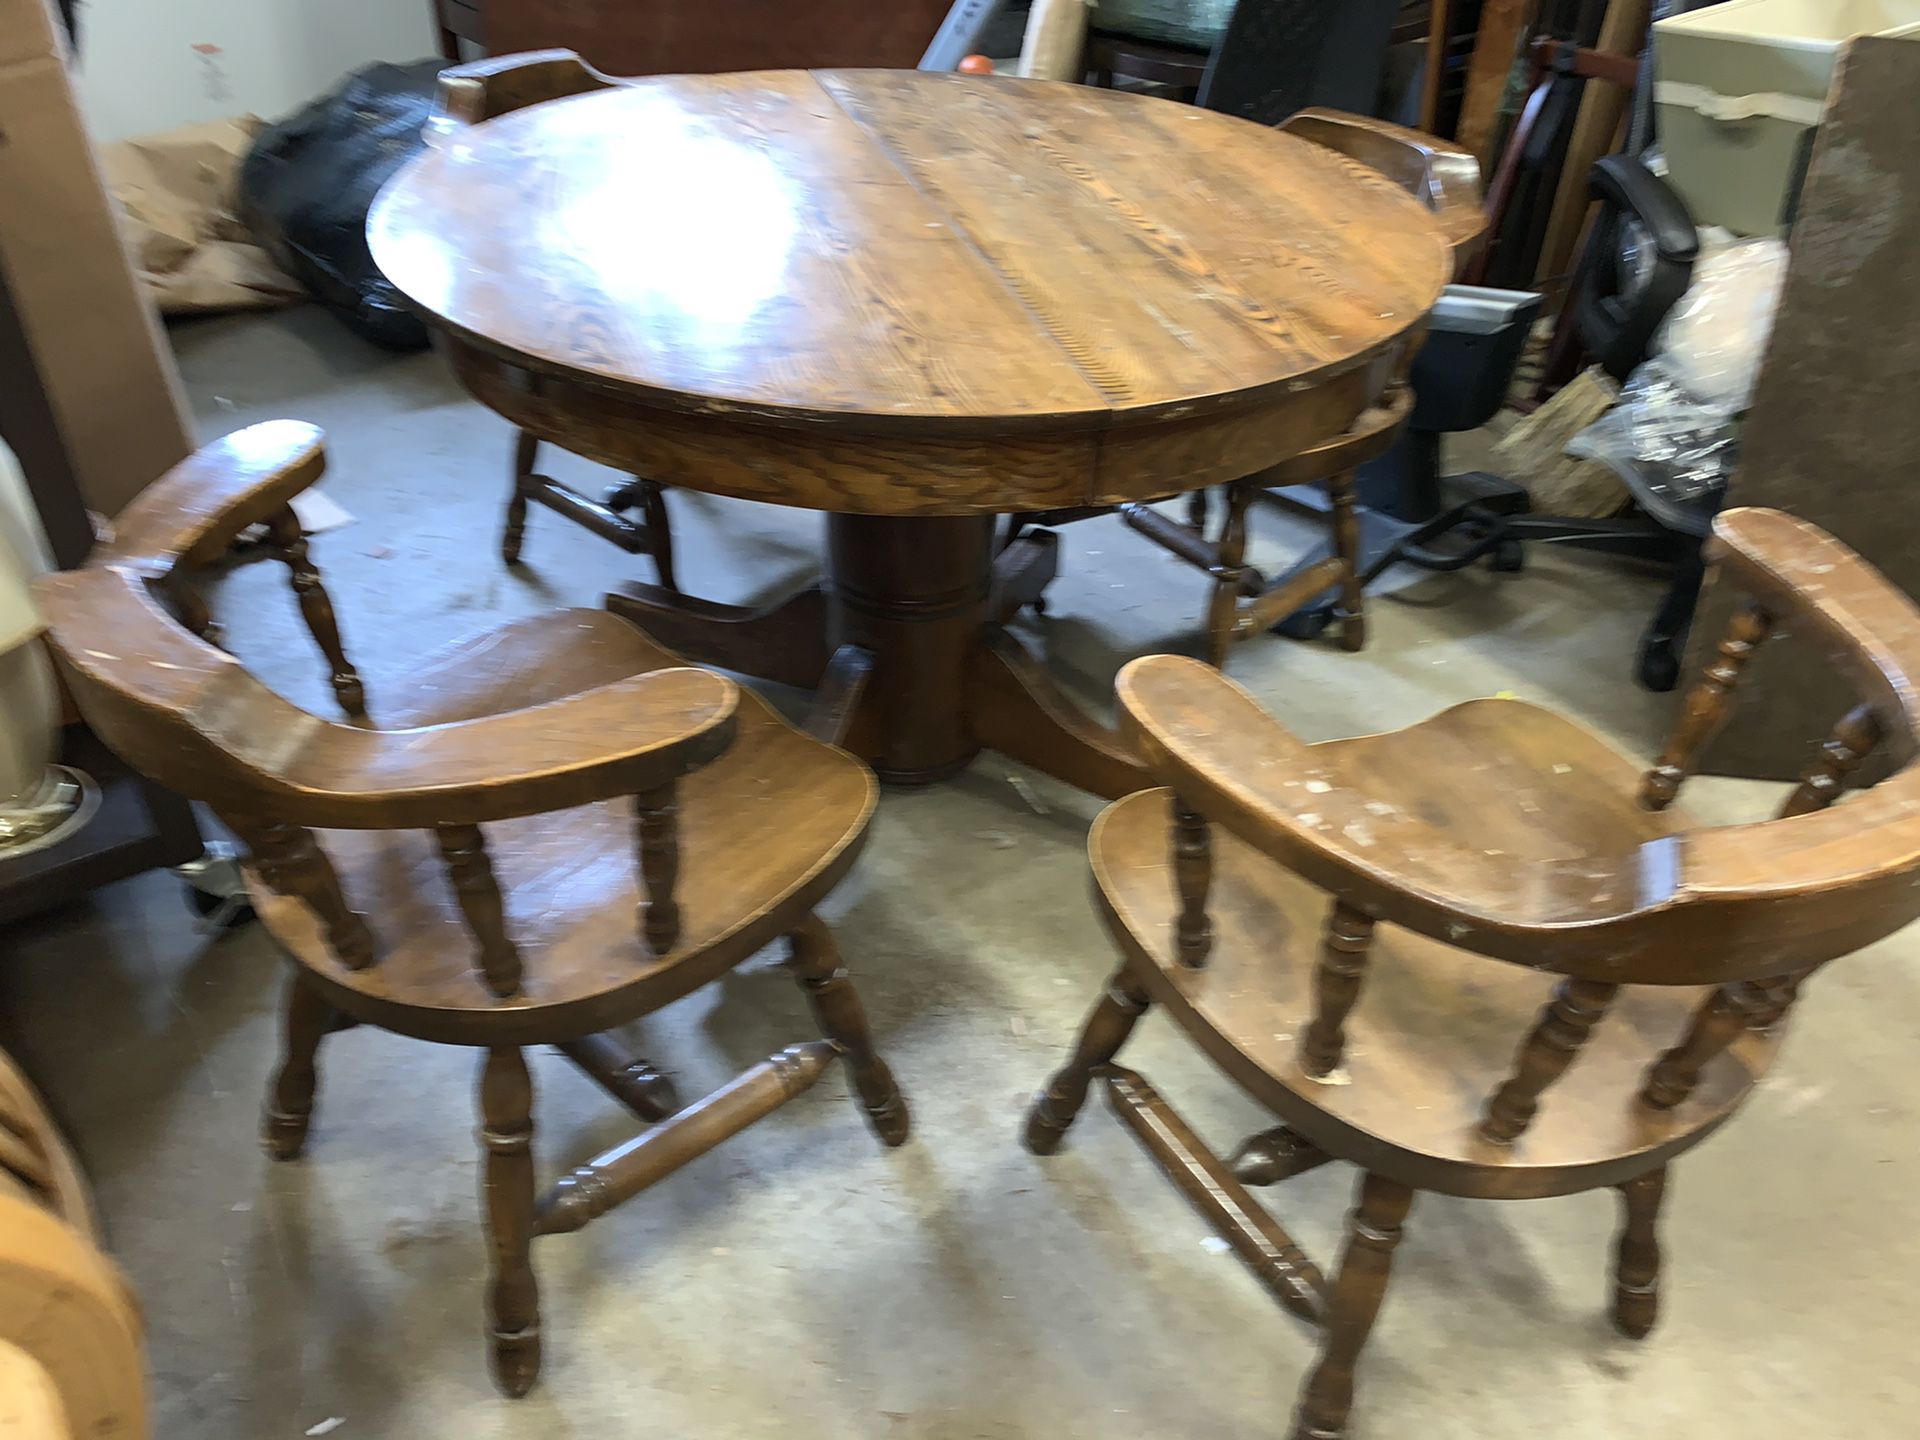 Solid vintage wooden round table with chairs